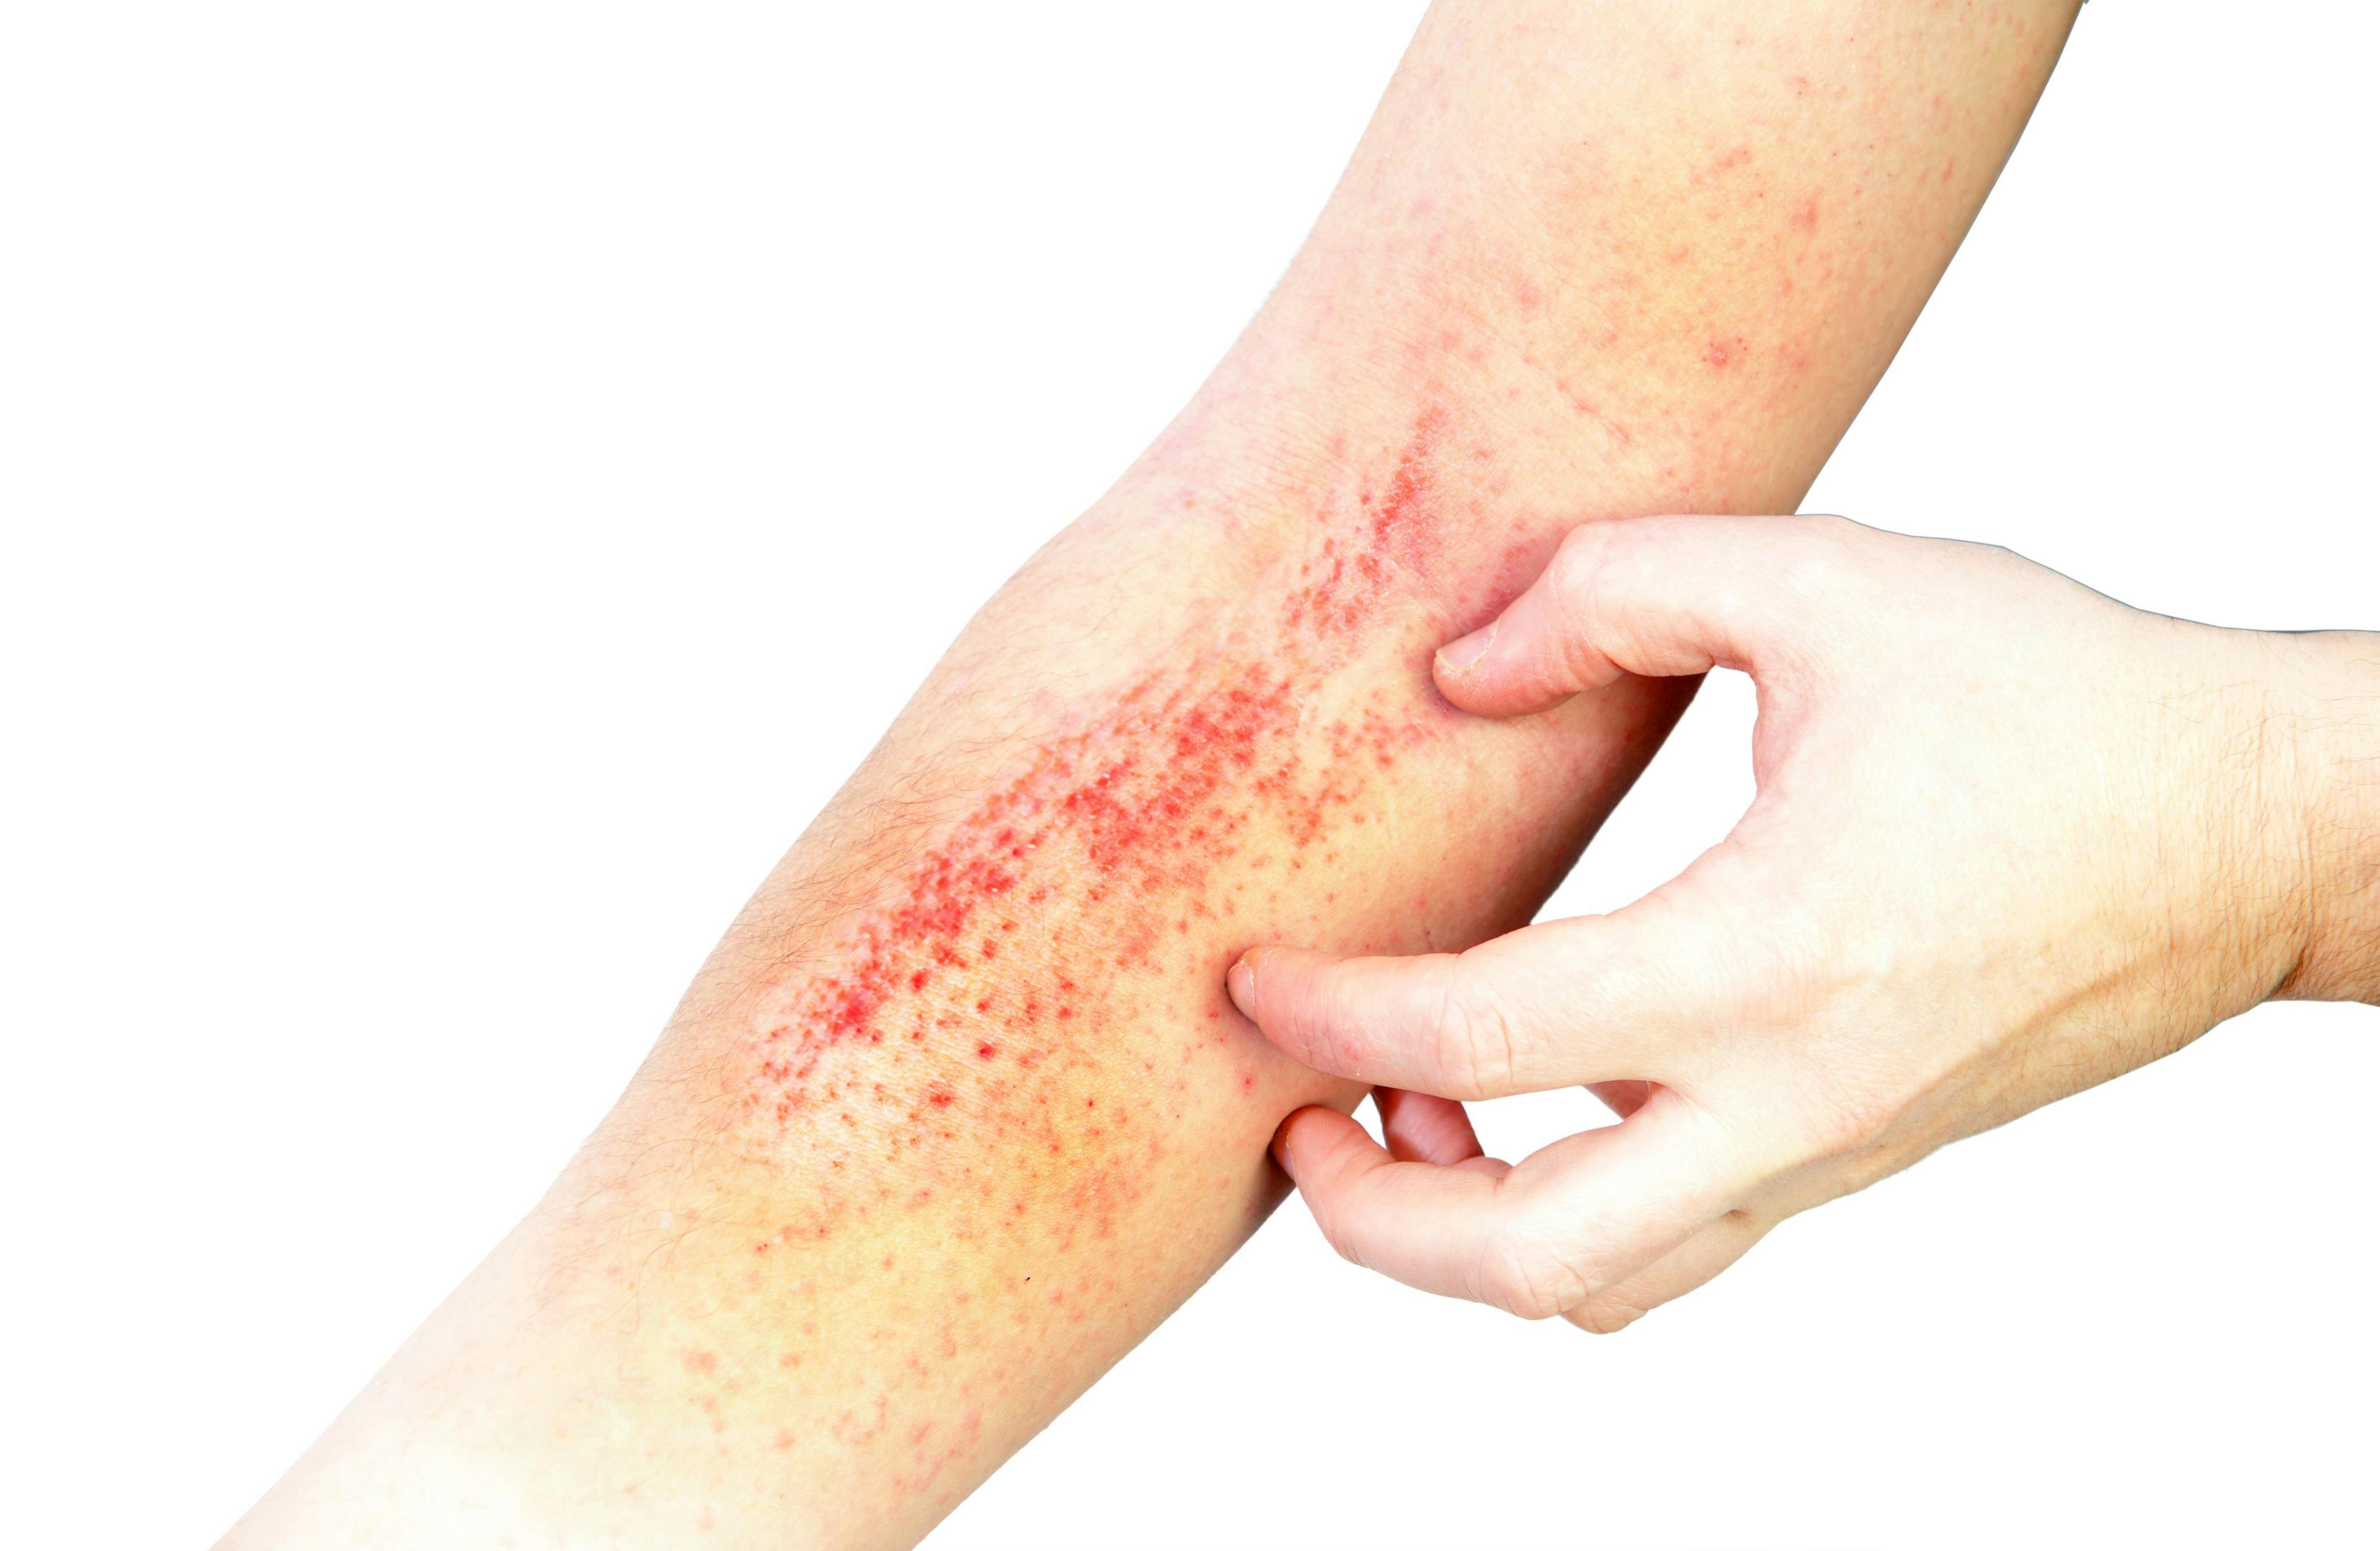 Lebrikizumab Maintains Skin Clearance for Two Years in Atopic Dermatitis